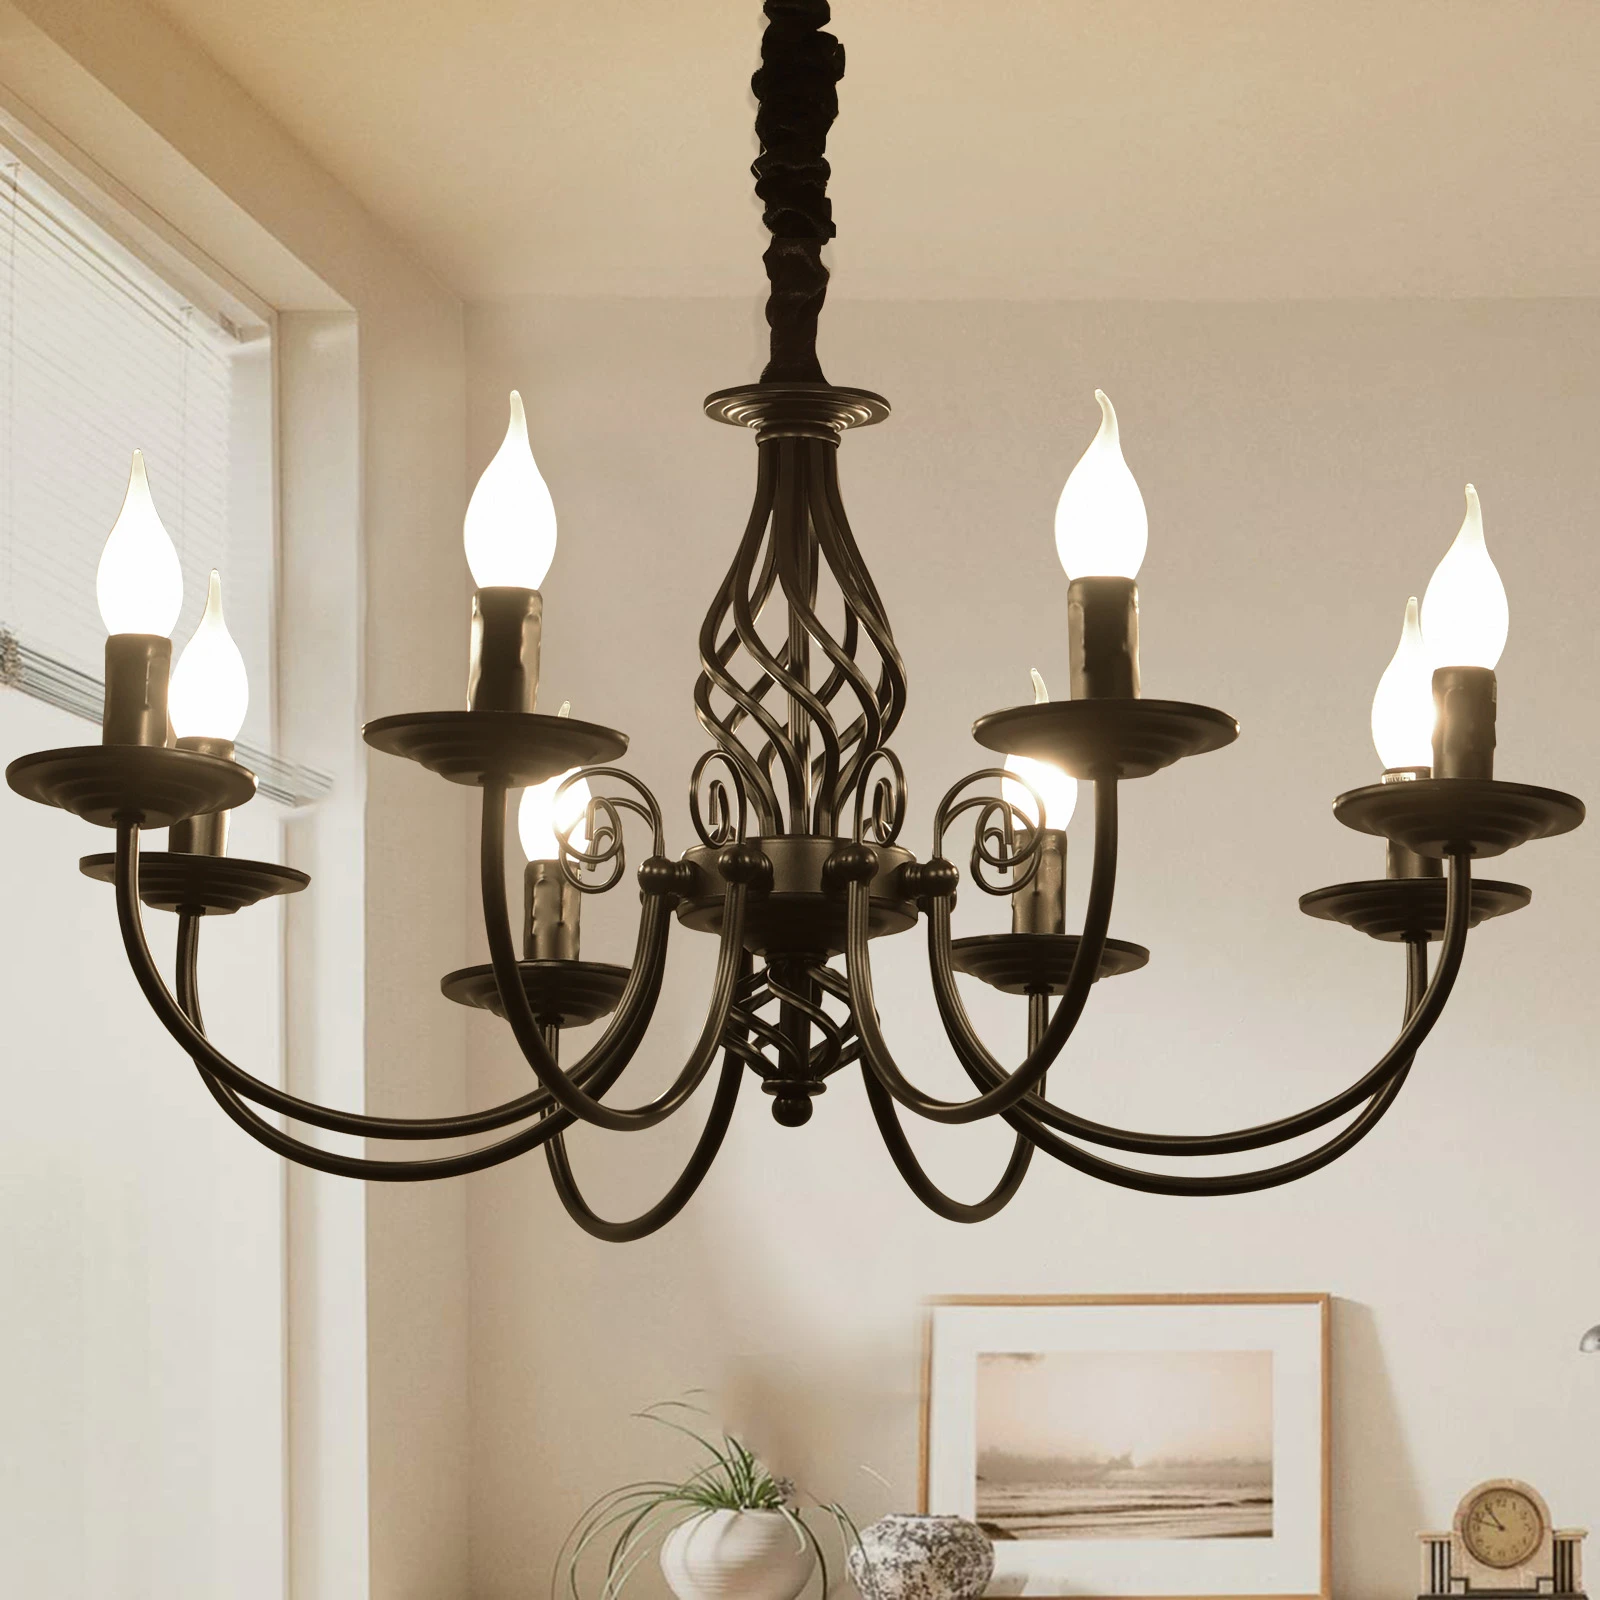 Ganeed Rustic Chandelier Retro Interior Lamp Ceiling Light Fixture For  Kitchen Farmhouse Dining Living Room Foyer Home Country - Chandeliers -  AliExpress